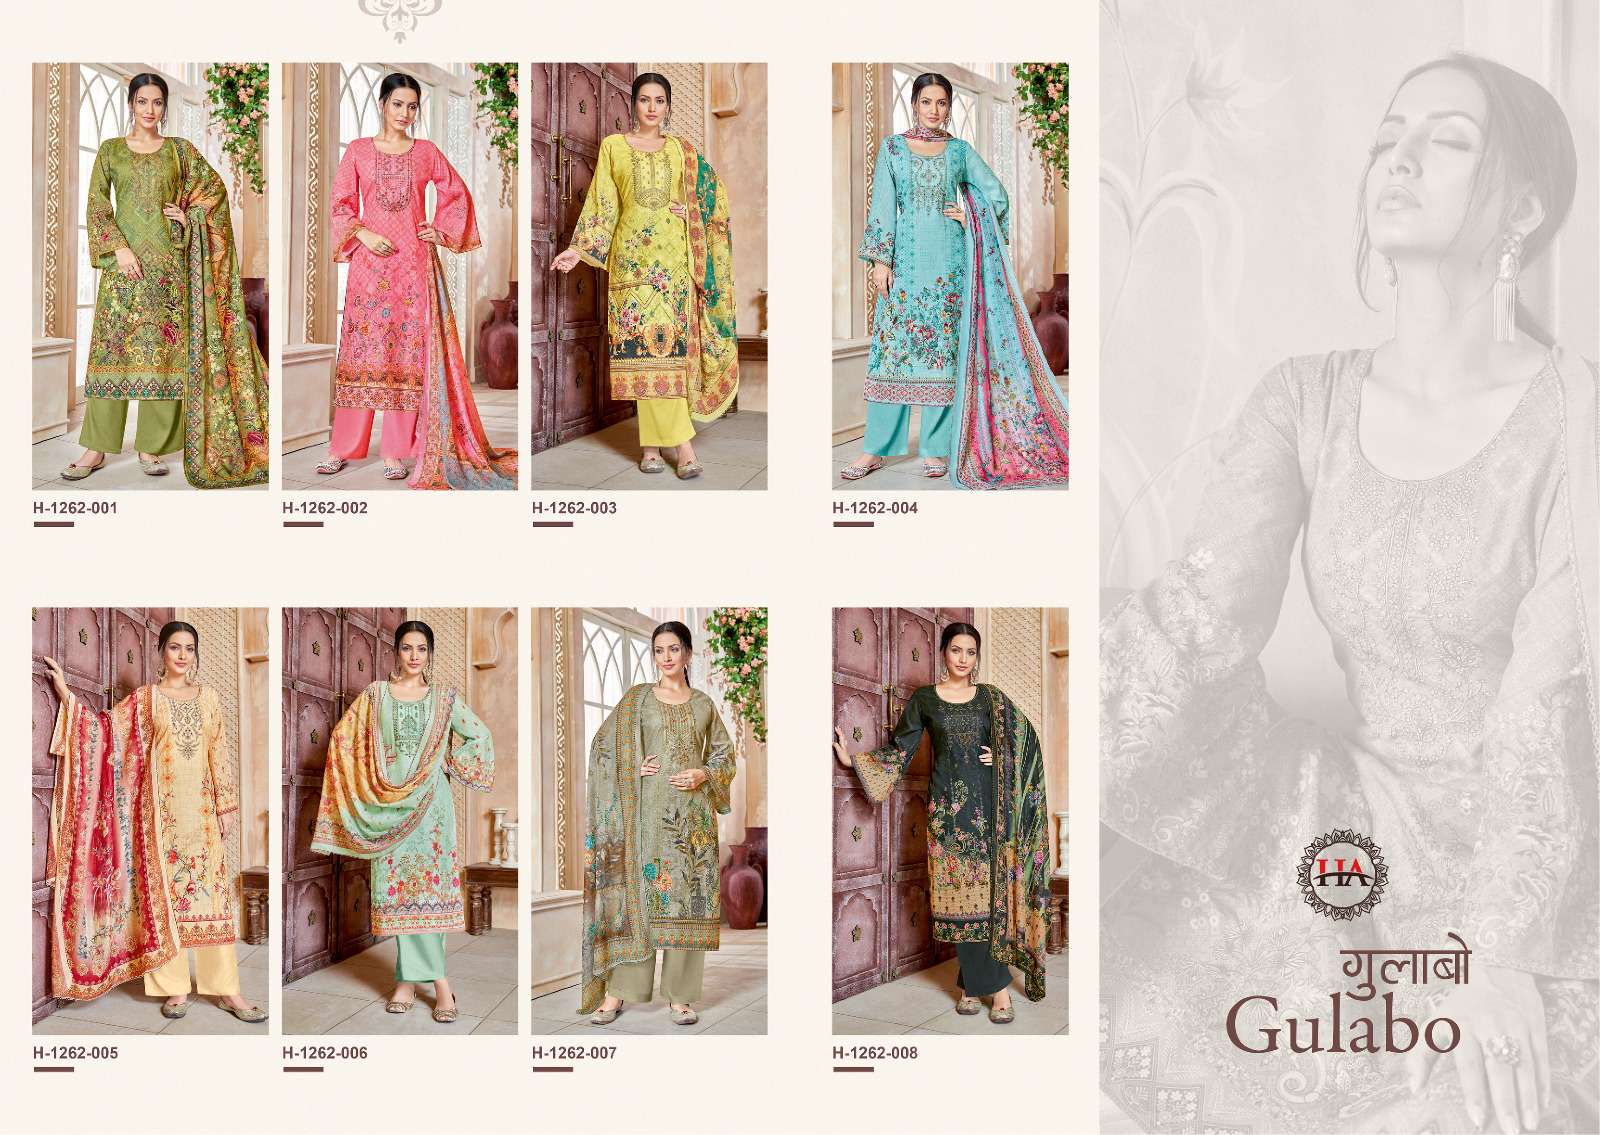 Gulabo By Harshit Fashion Hub 1262-001 To 1262-008 Series Beautiful Stylish Festive Suits Fancy Colorful Casual Wear & Ethnic Wear & Ready To Wear Pure Soft Cotton With Embroidery Dresses At Wholesale Price